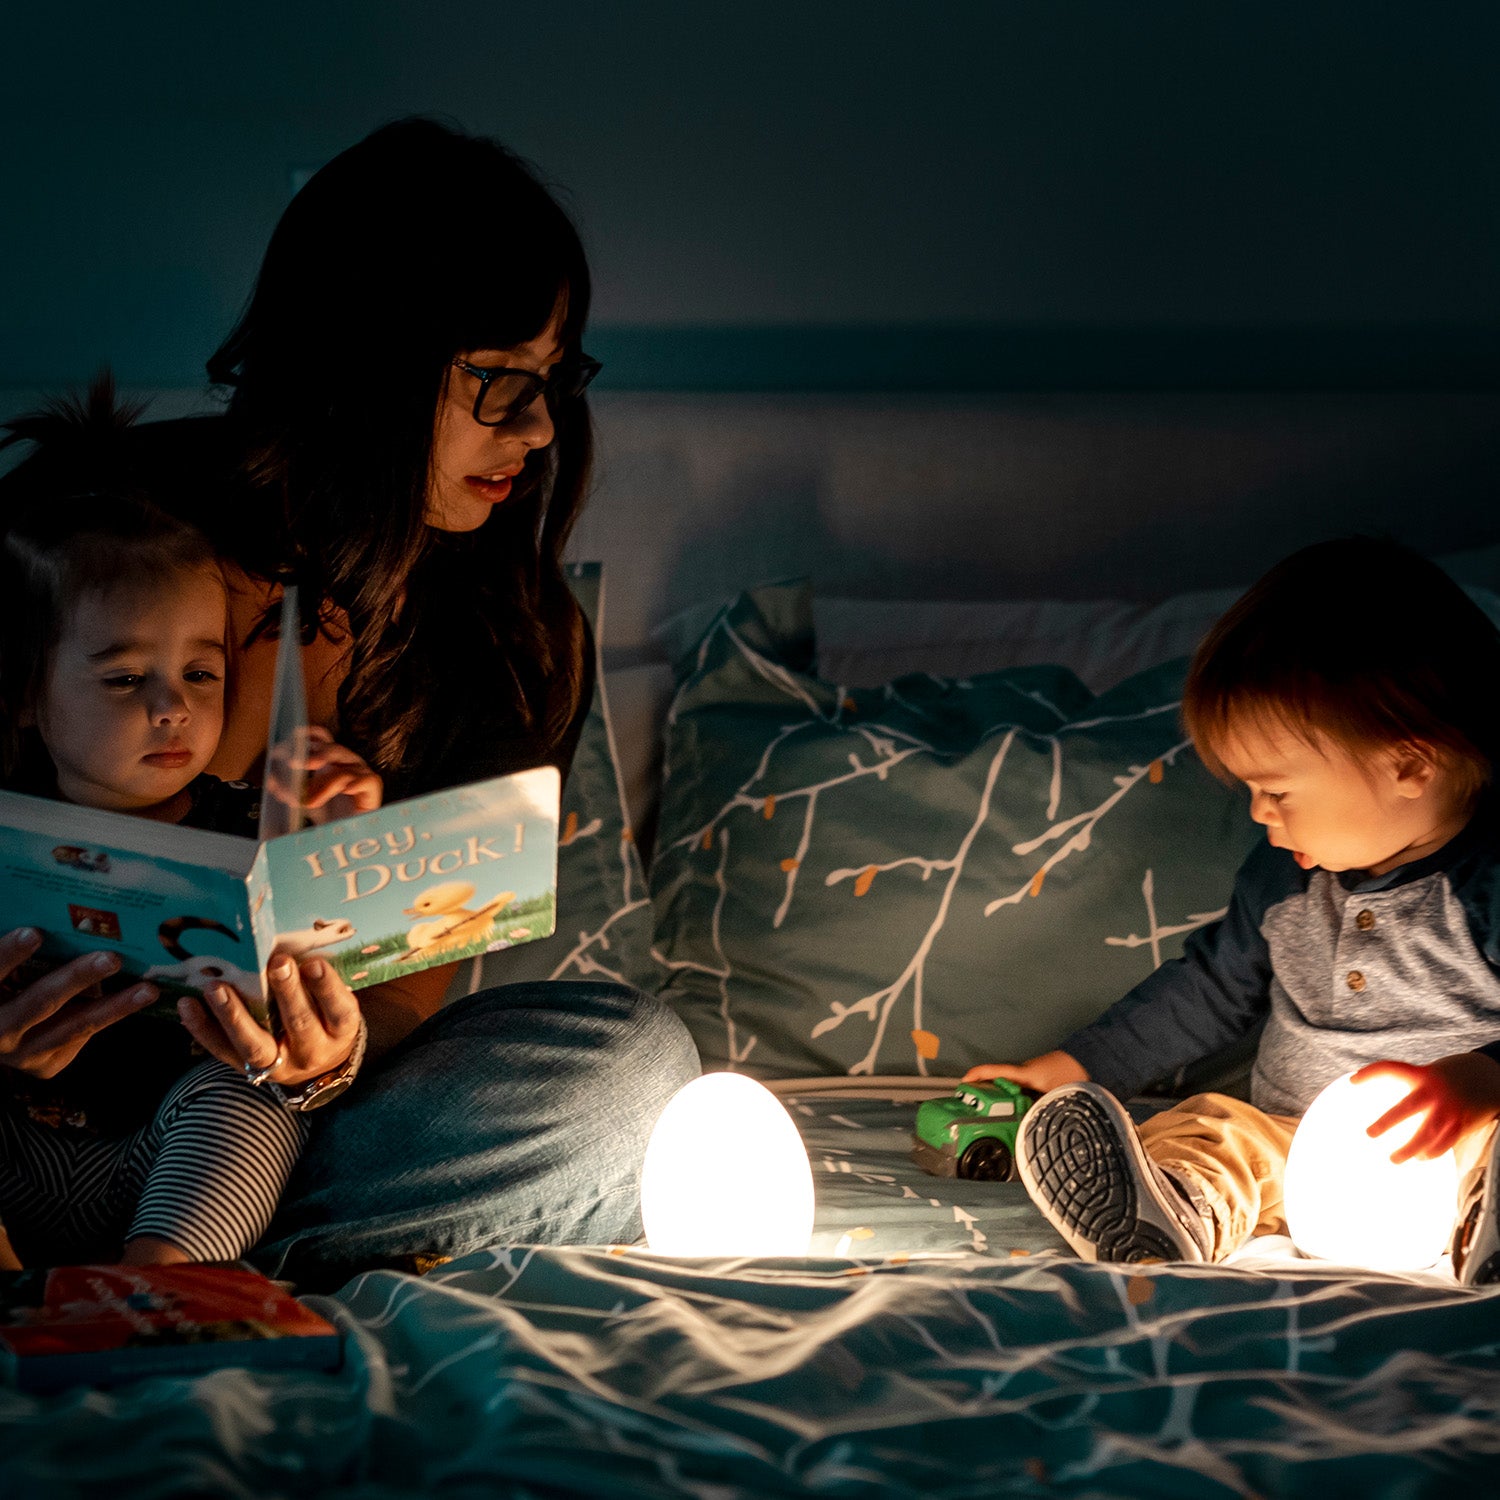 Toddler girl reading a book on a caregiver’s lap next to a VAVA baby night light, toddler boy playing with a green toy car while holding a VAVA baby night light